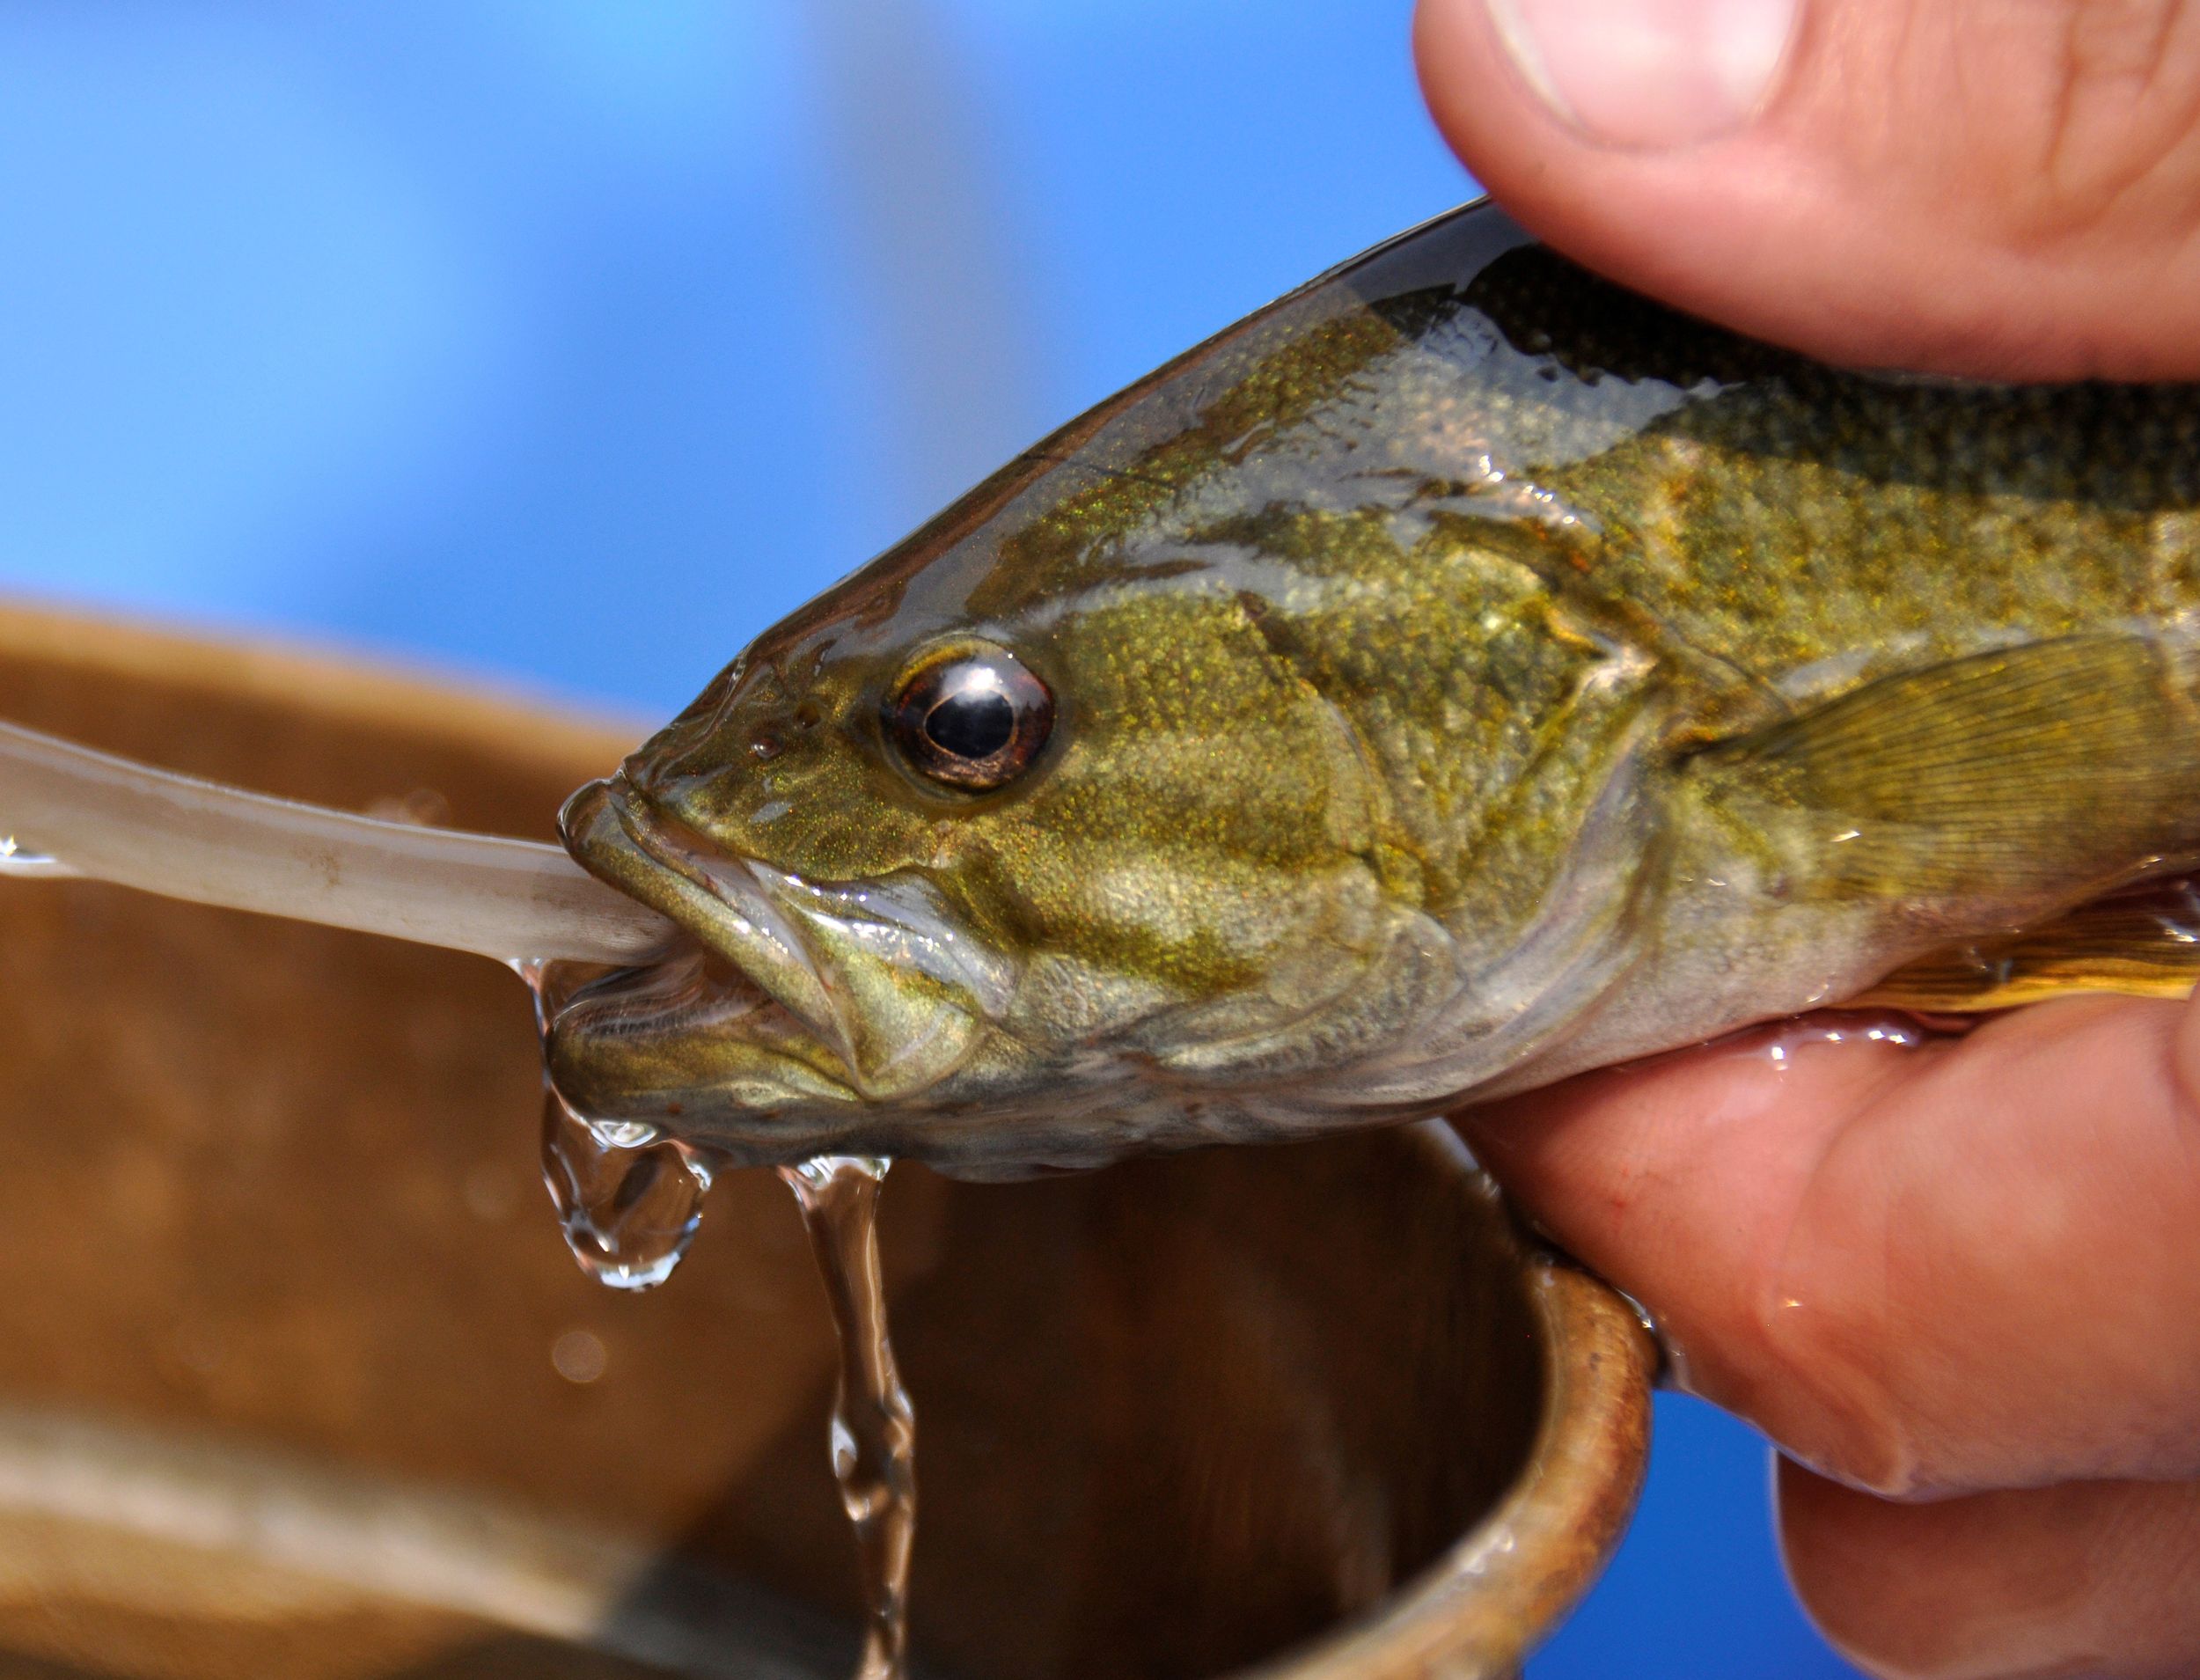 Graduate student focuses study on smallmouth bass